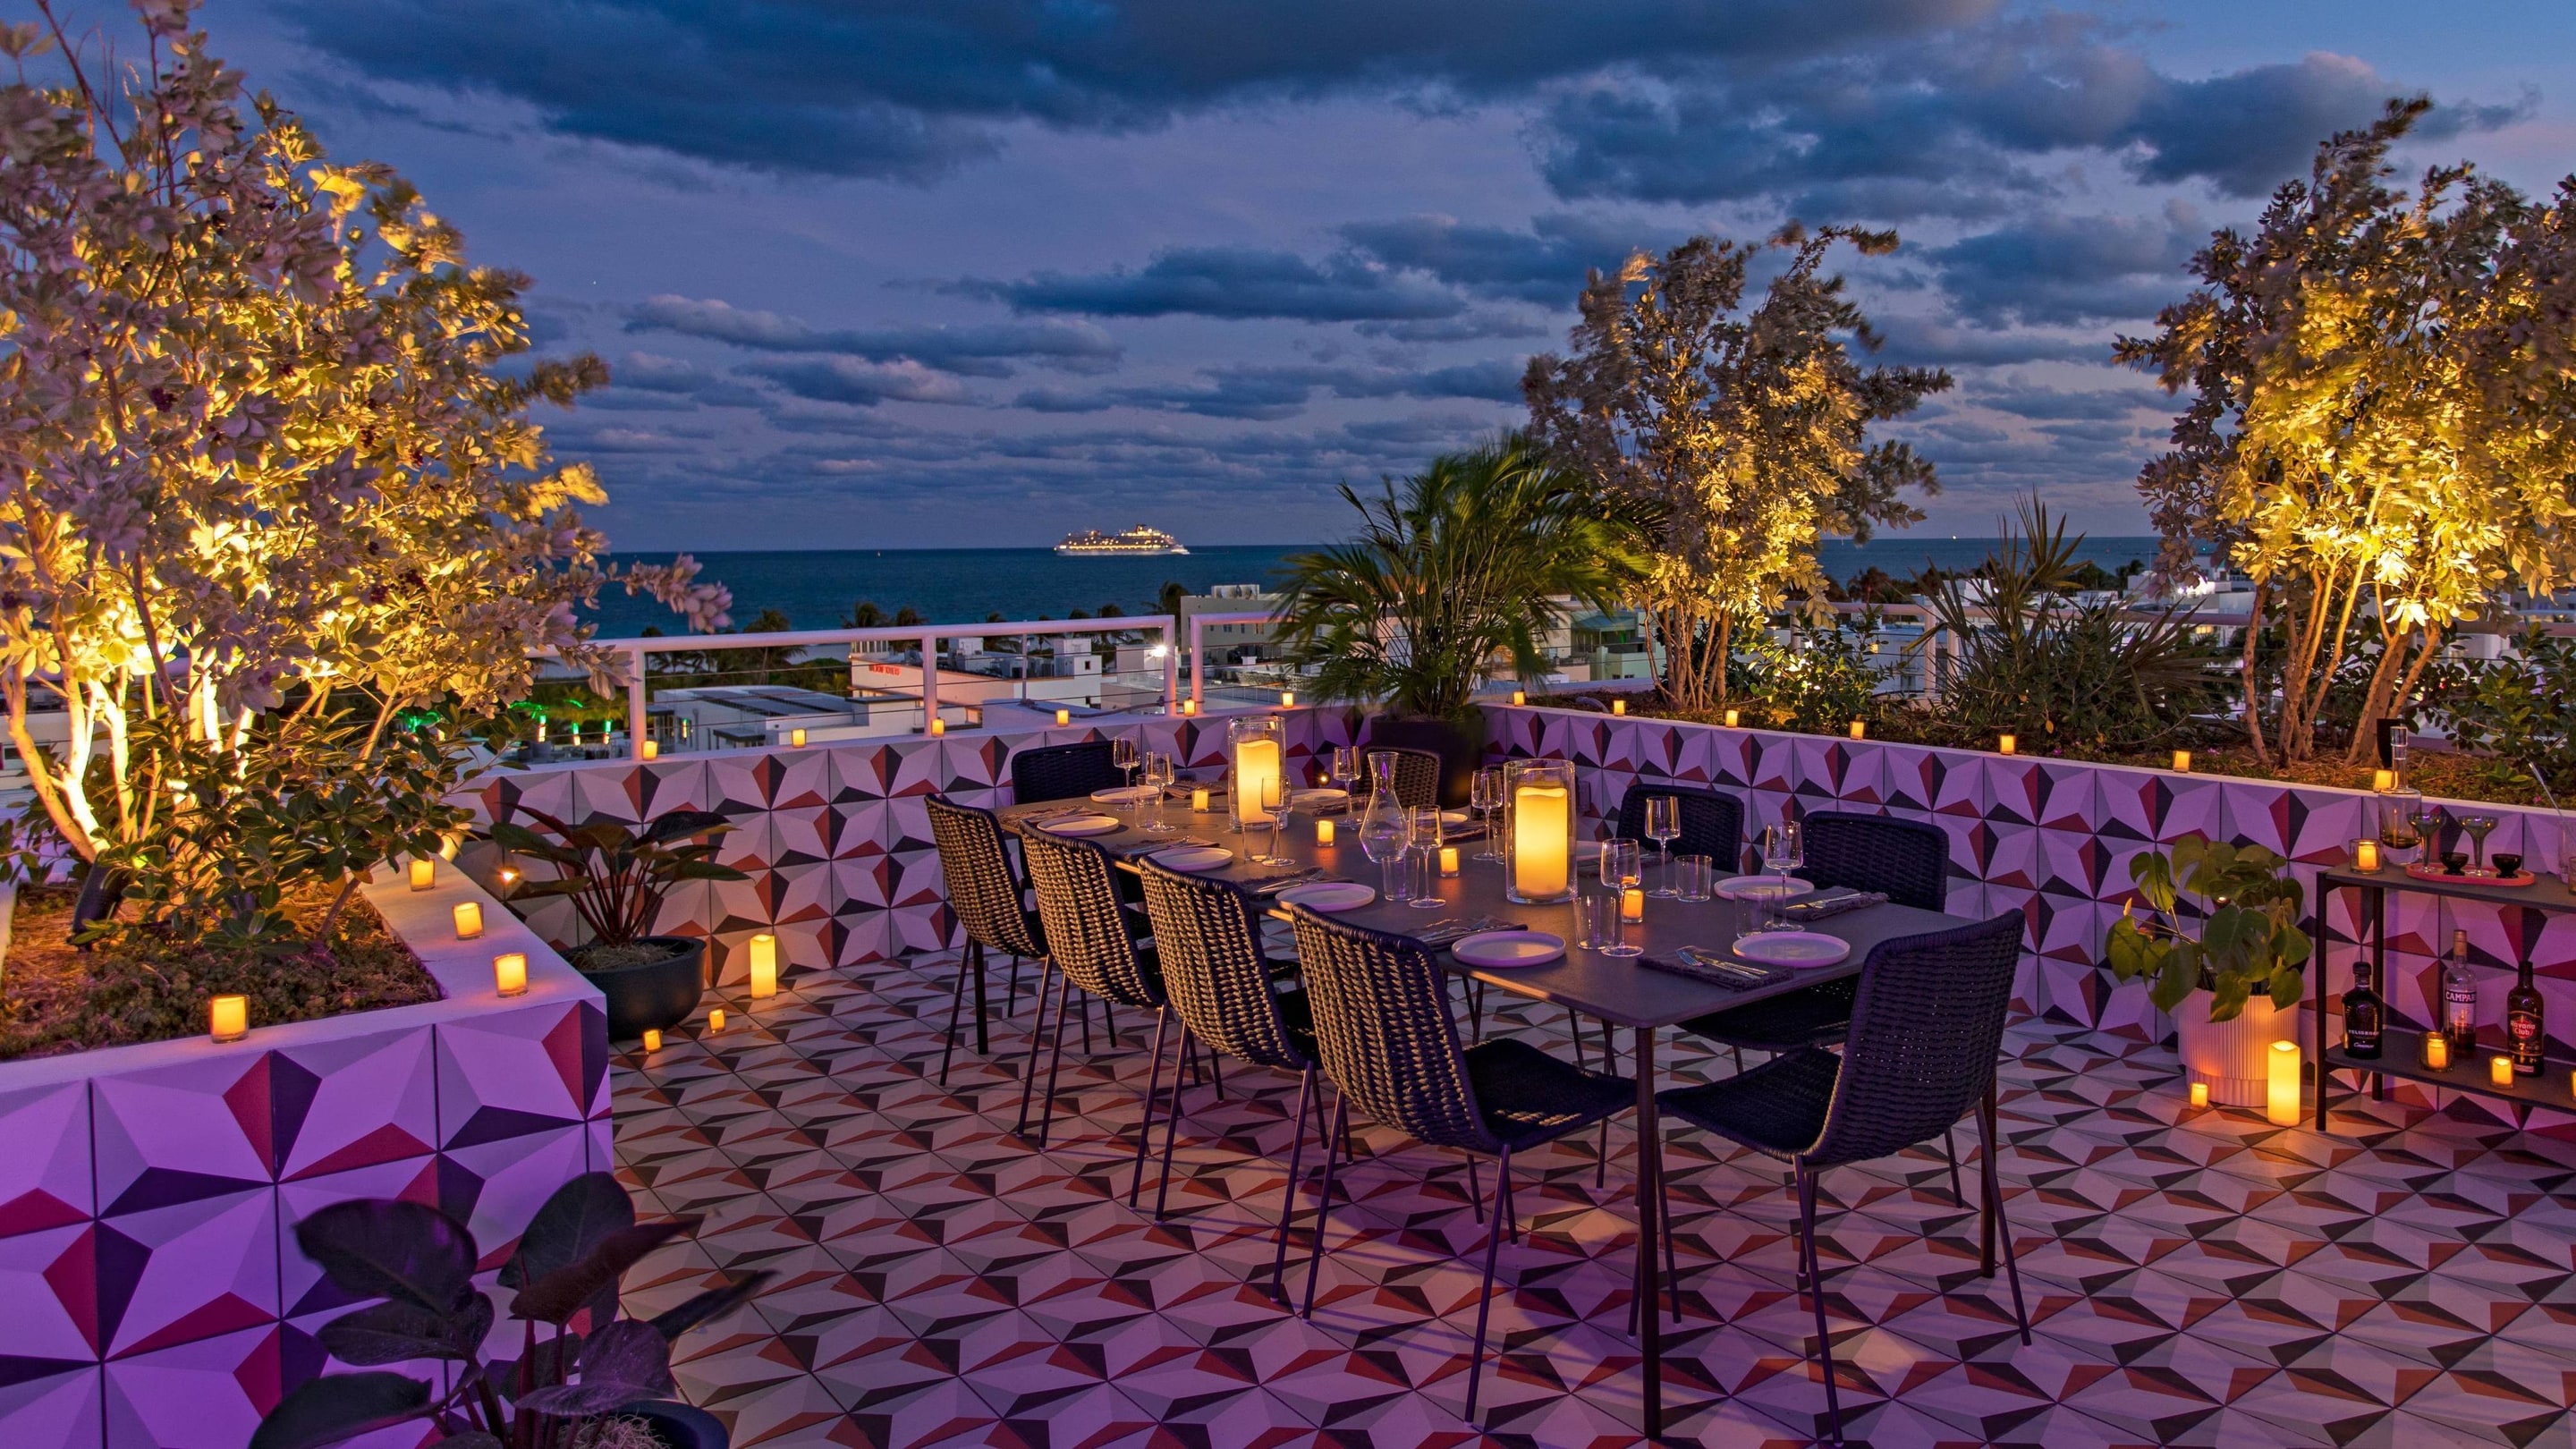 The upside rooftop bar and private dining area with colorful design and stunning view. 